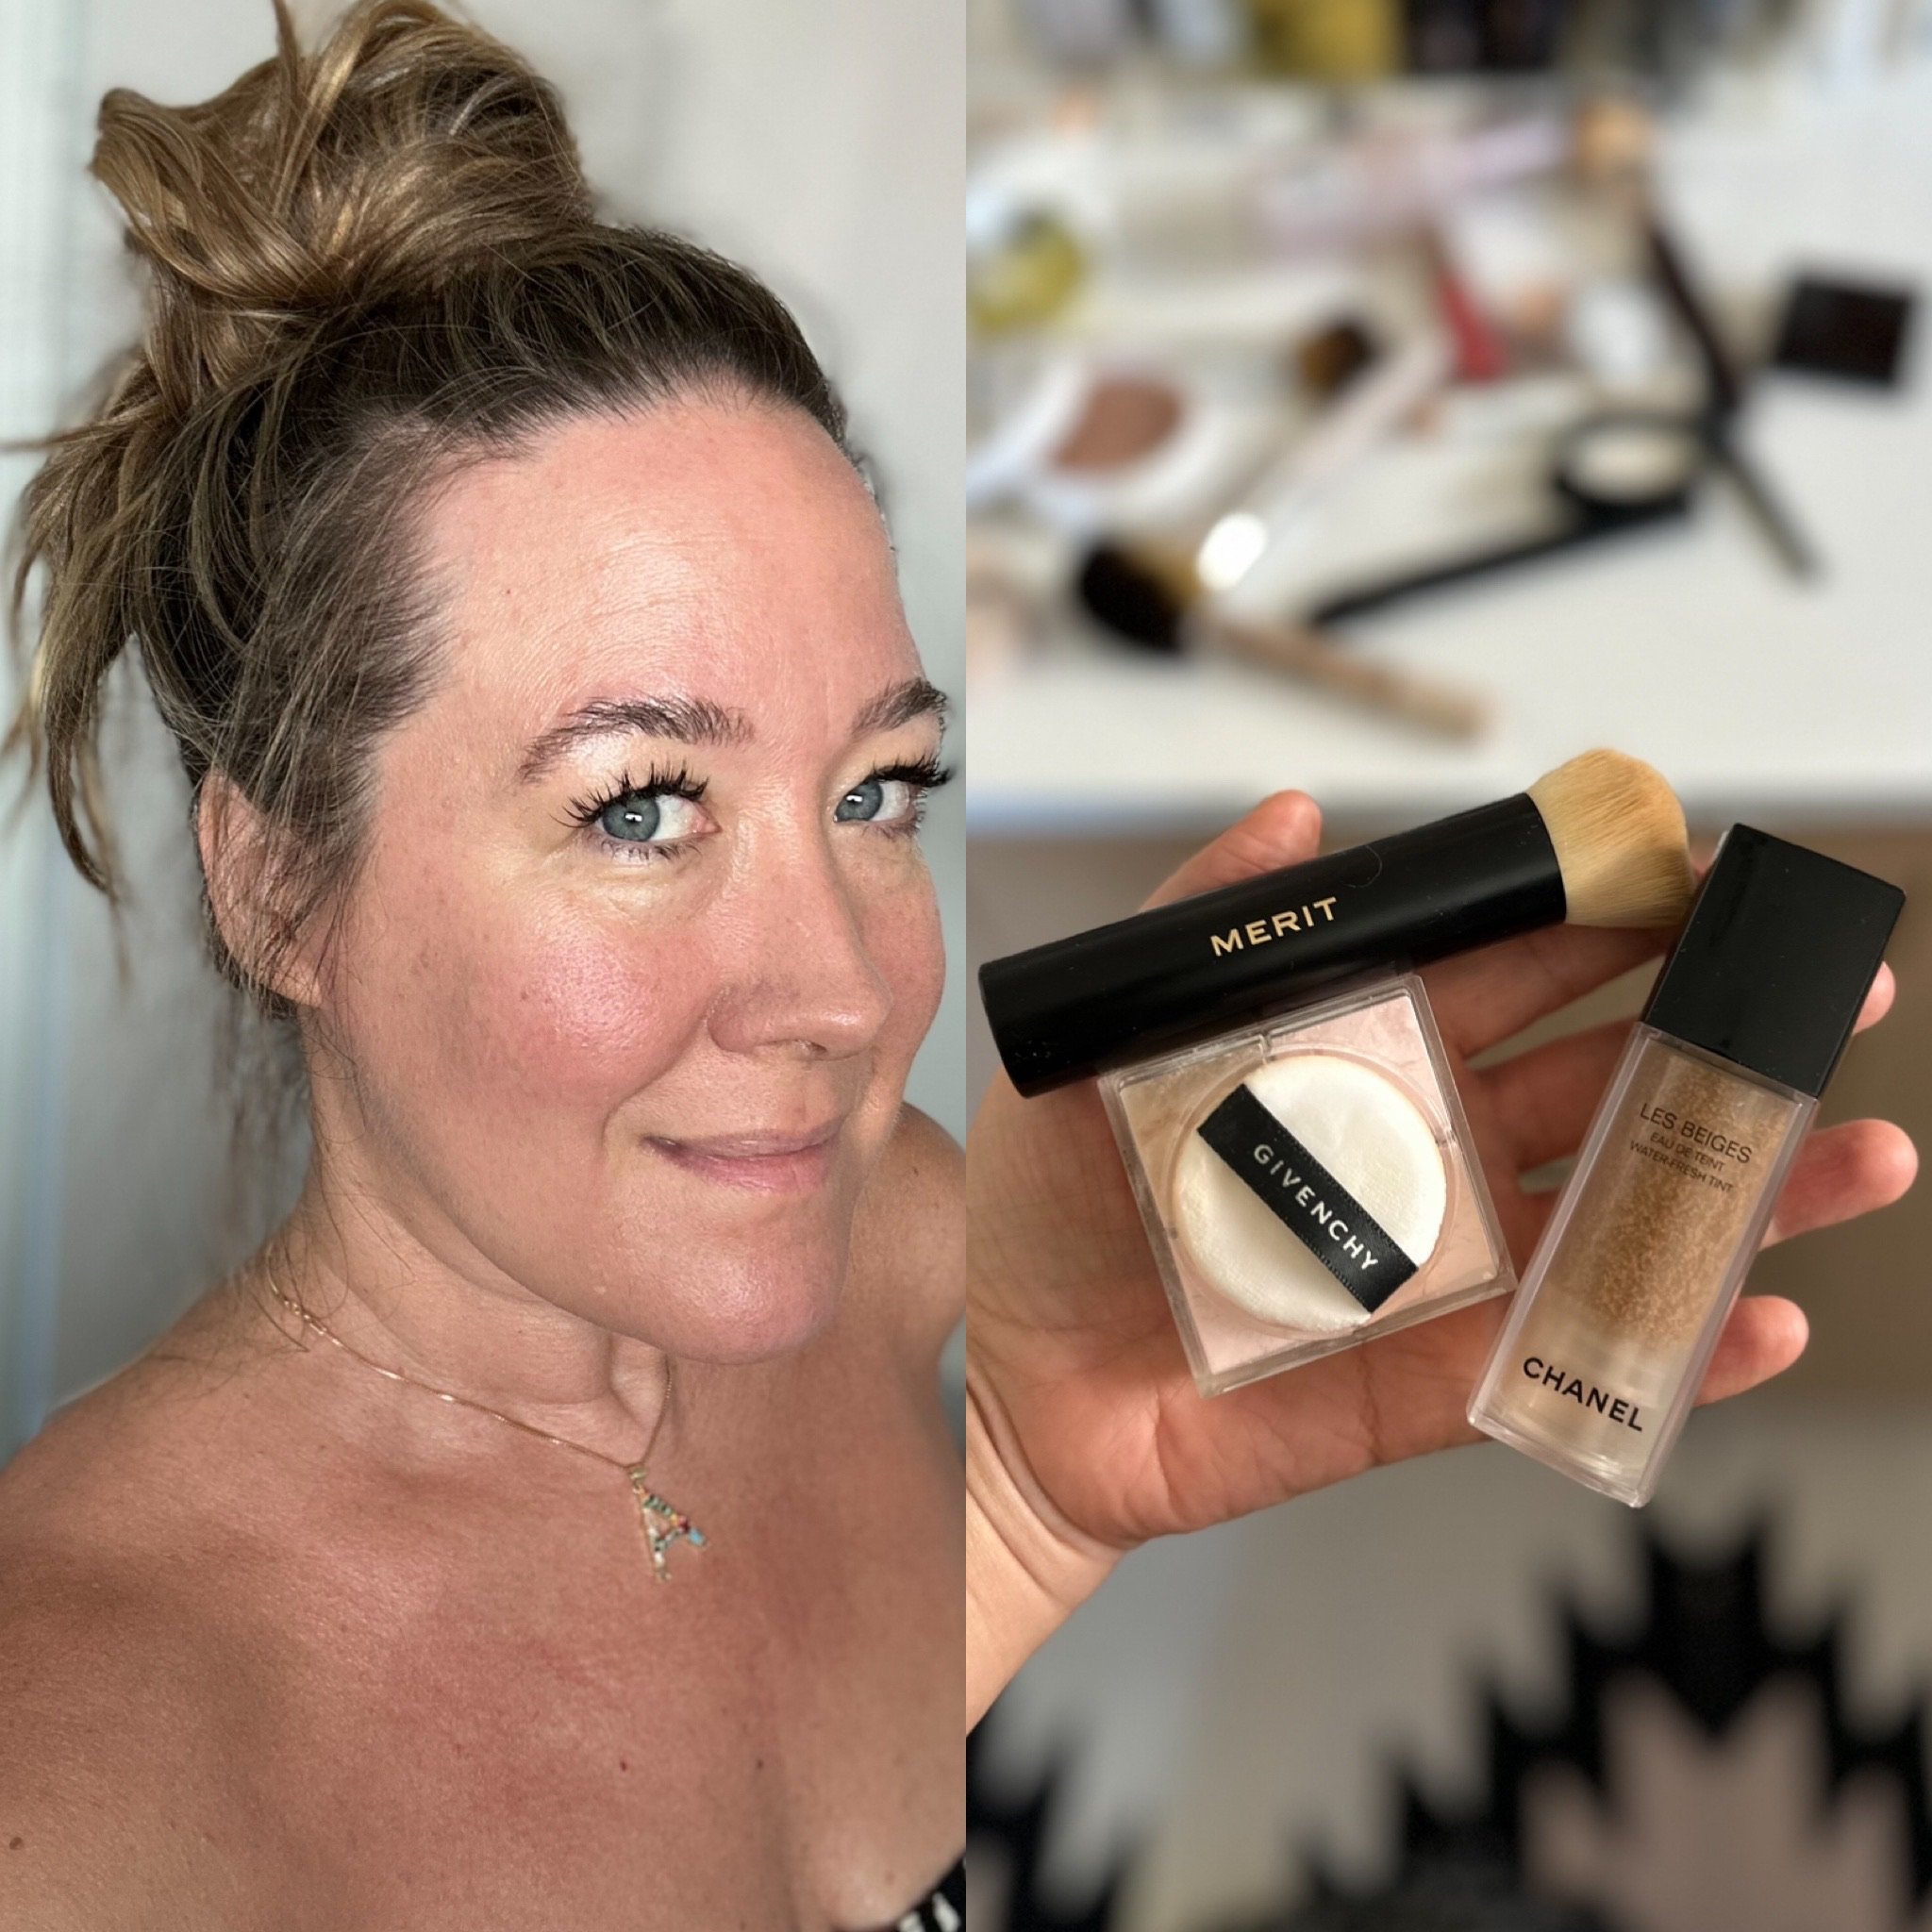 Chanel Les Beiges Water Fresh Tint Foundation